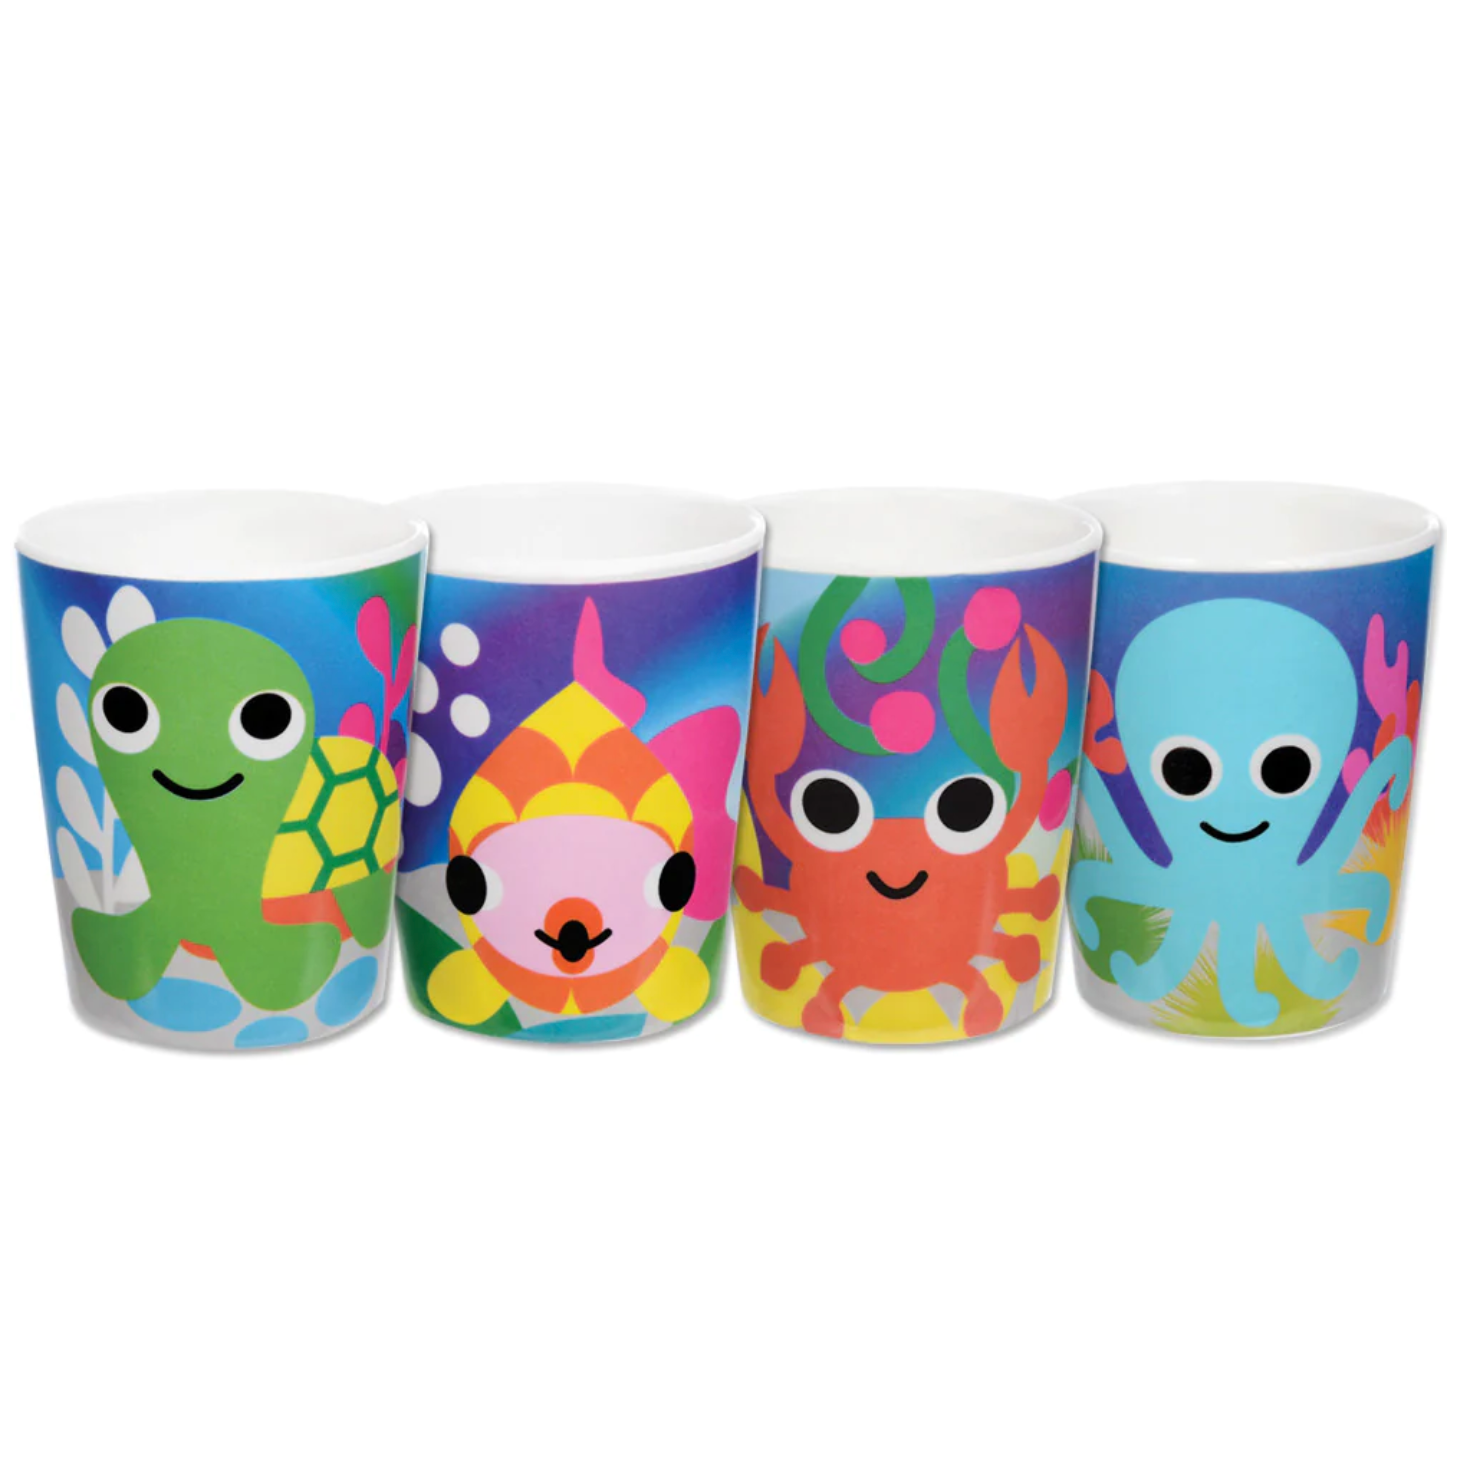 French Bull Kids Everyday Melamine 4 Piece Cup Set – Ocean Animals